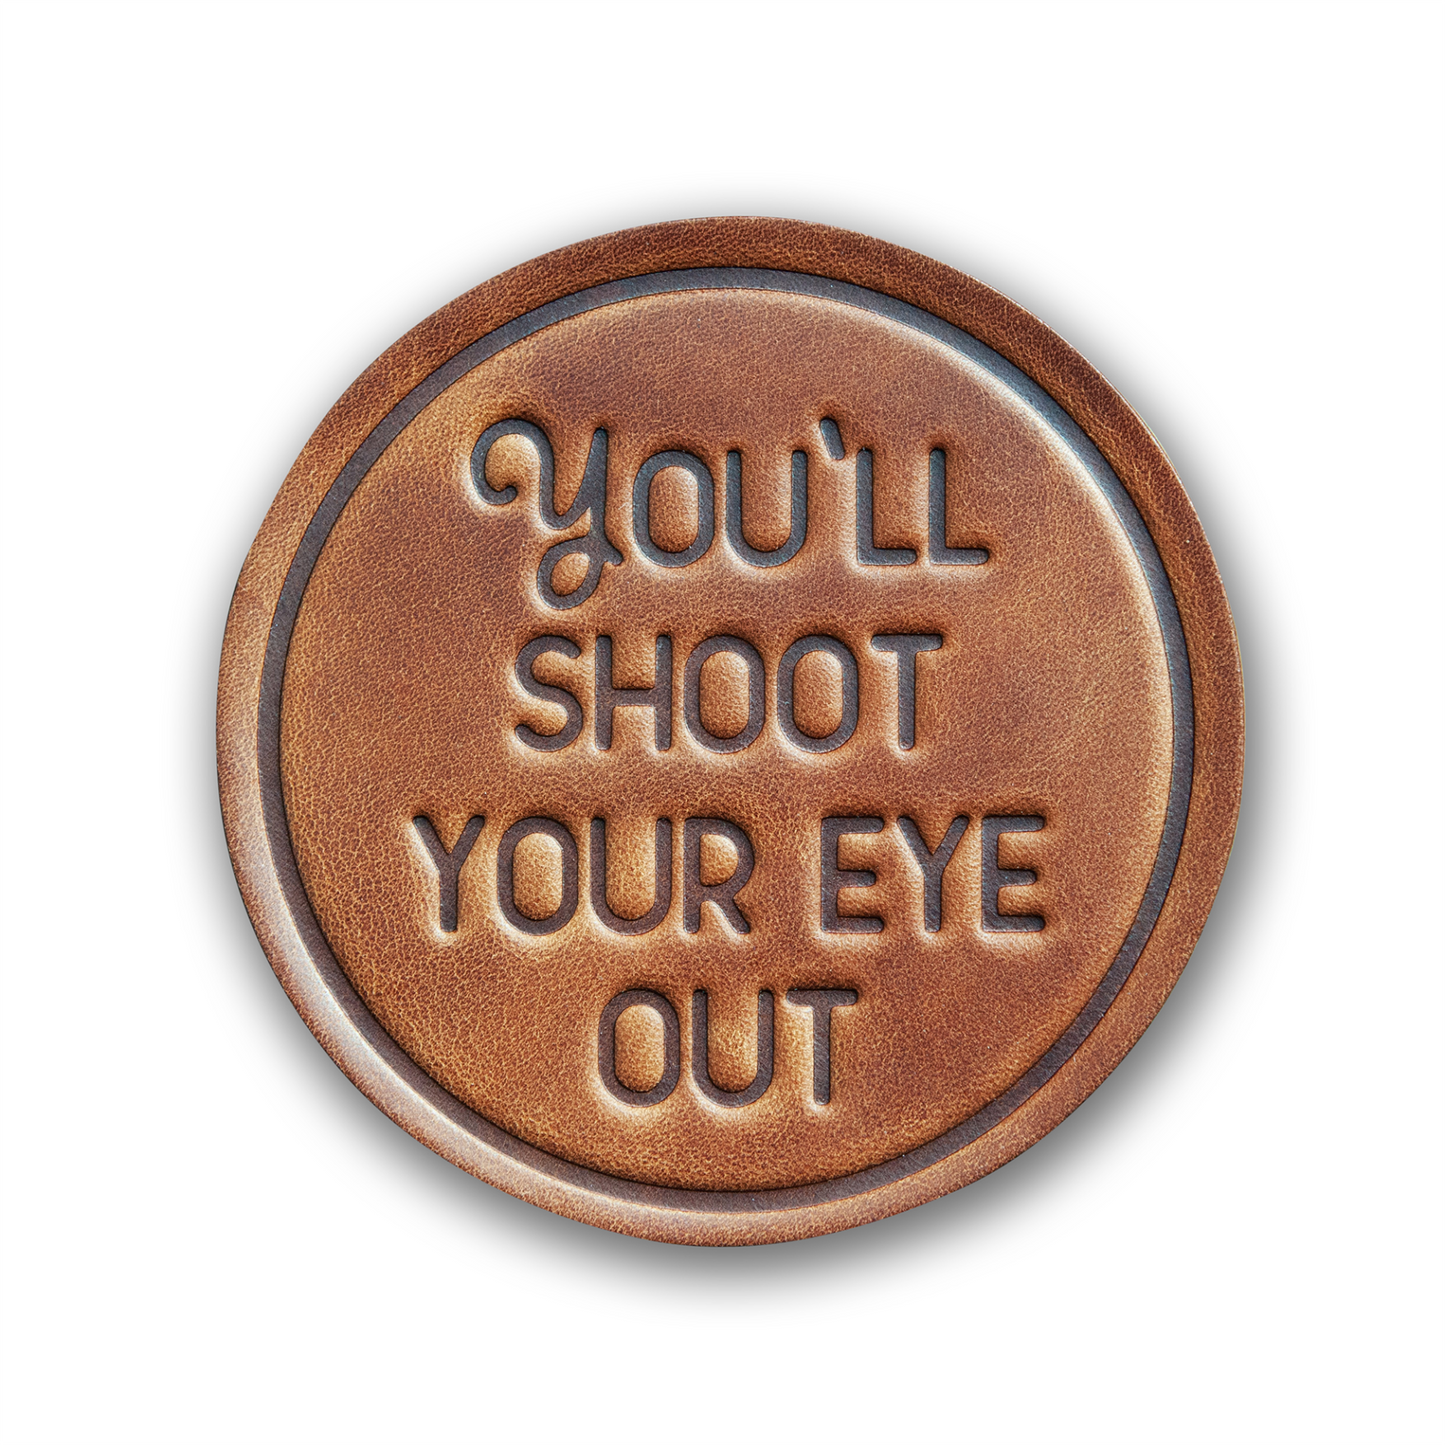 YOU’LL SHOOT YOUR EYE OUT COASTER